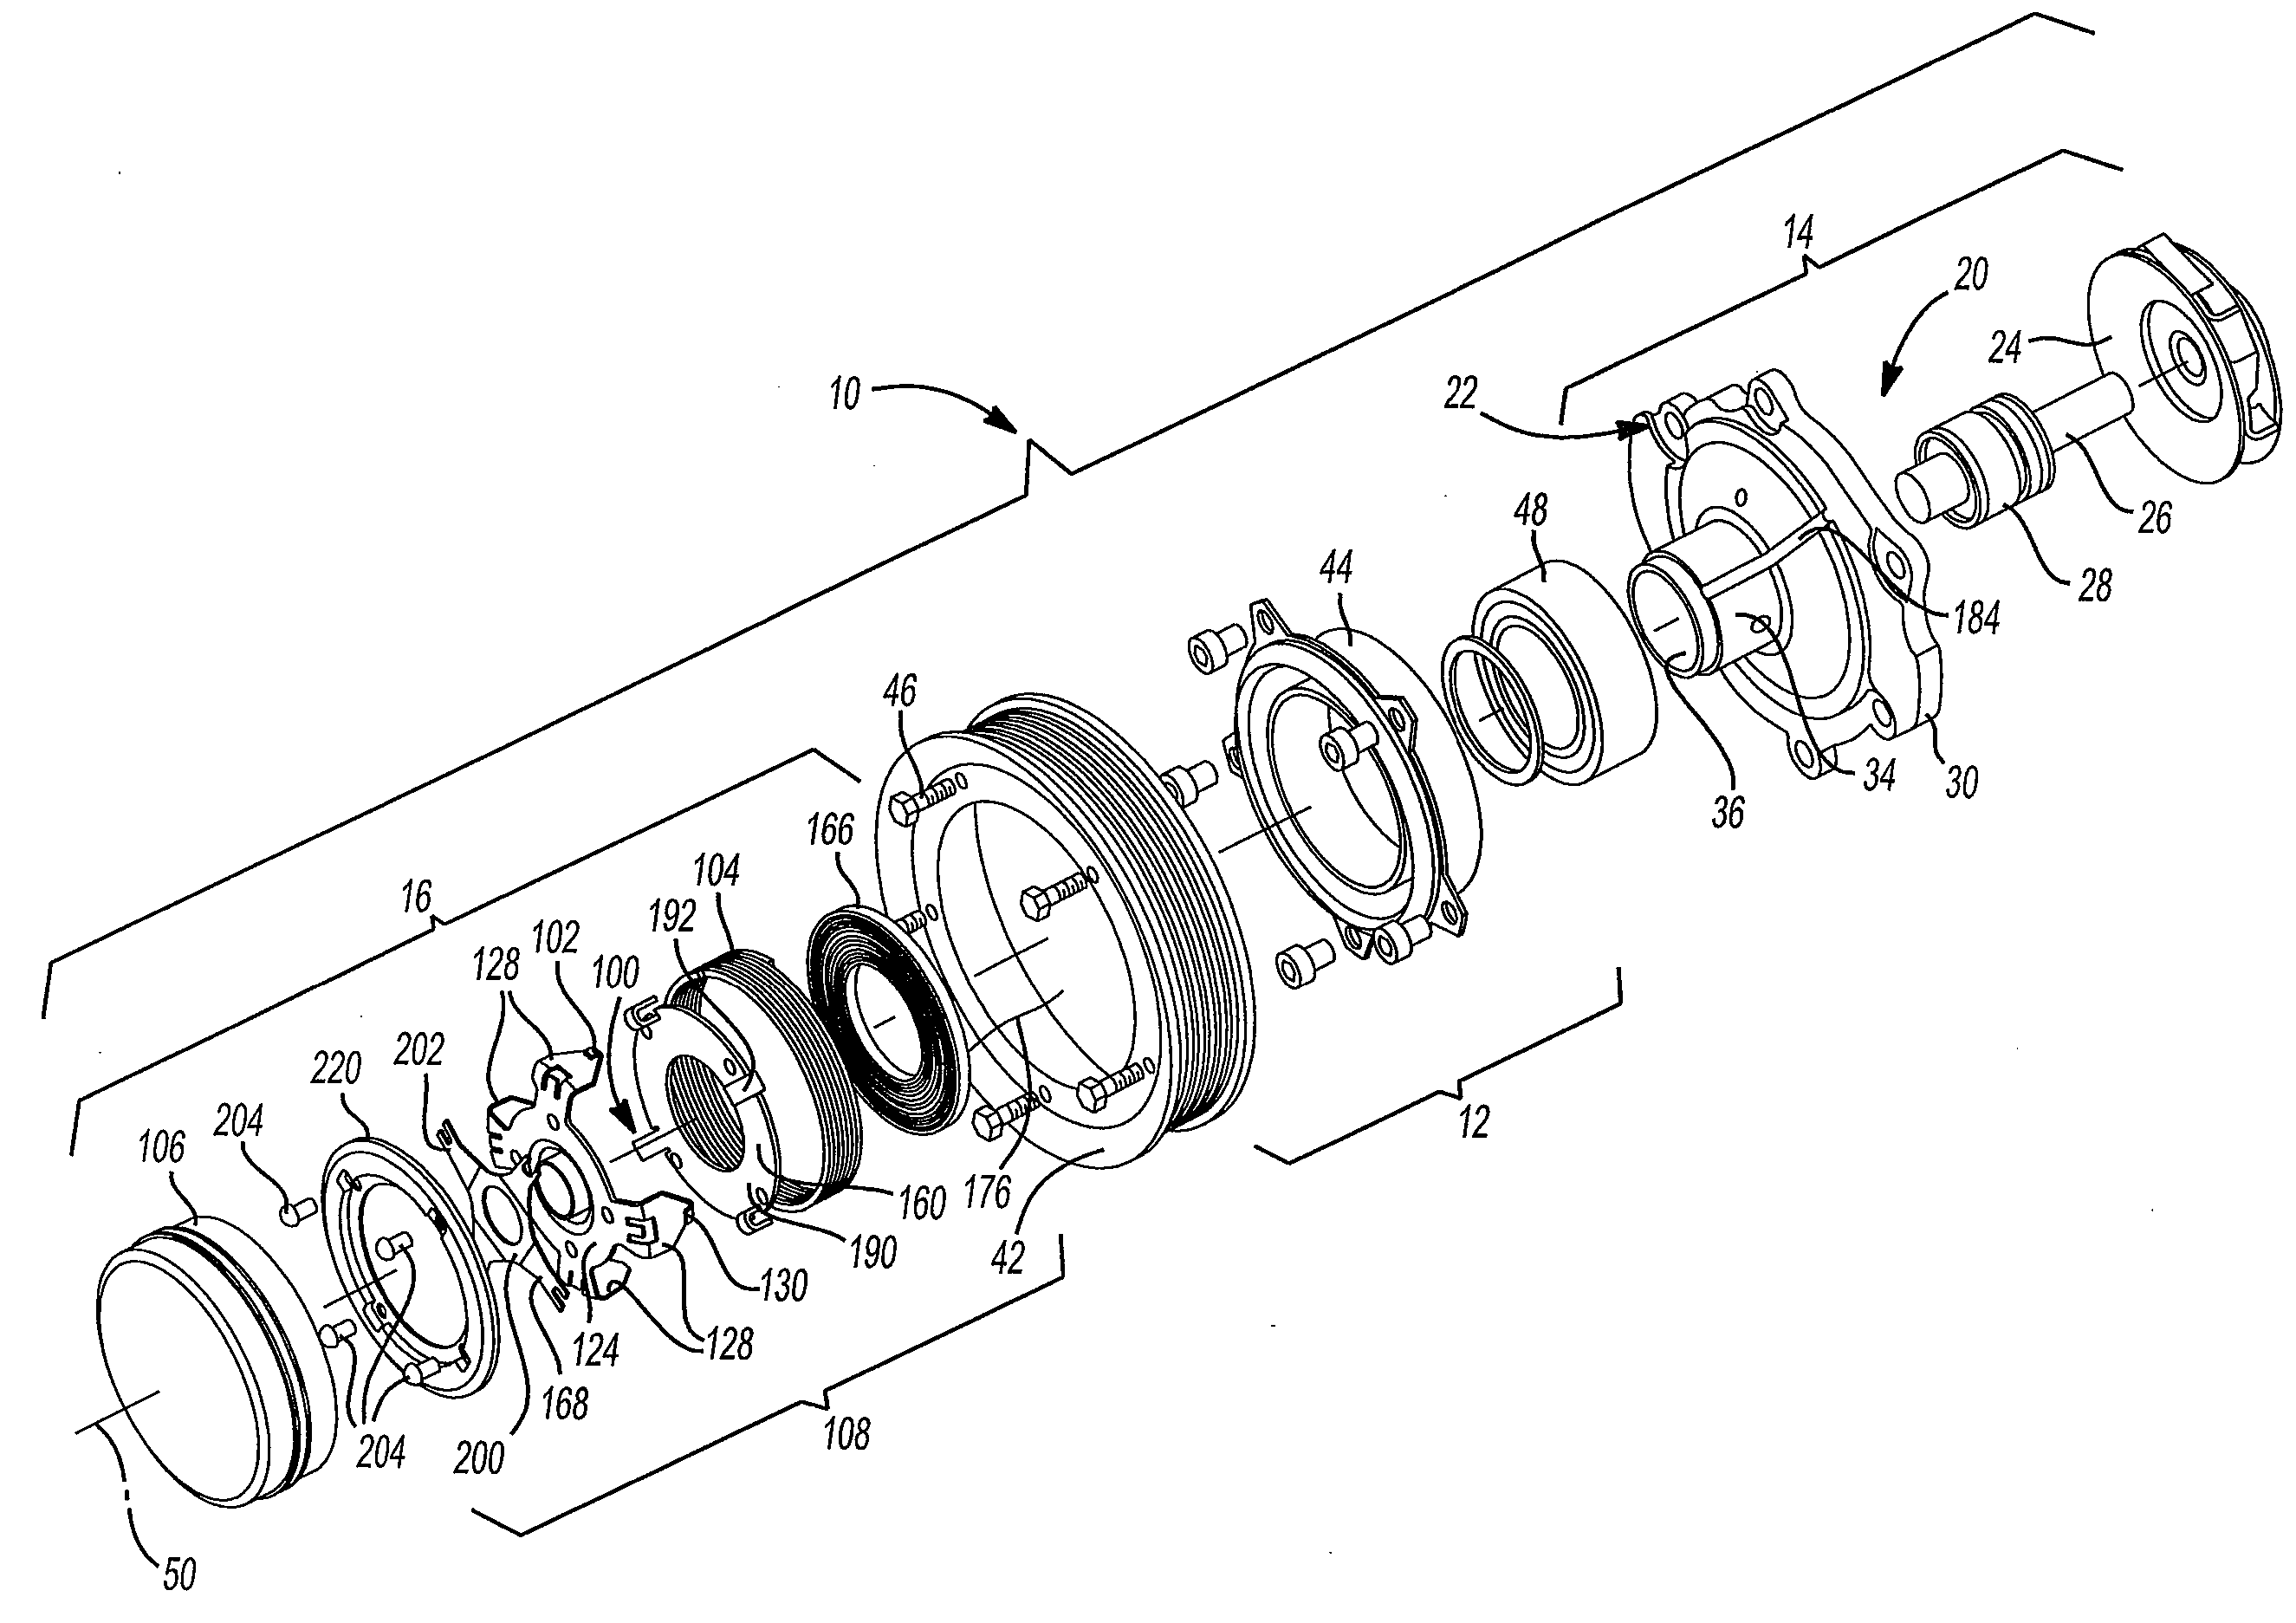 Driven accessory with low-power clutch for activating or de-activating same